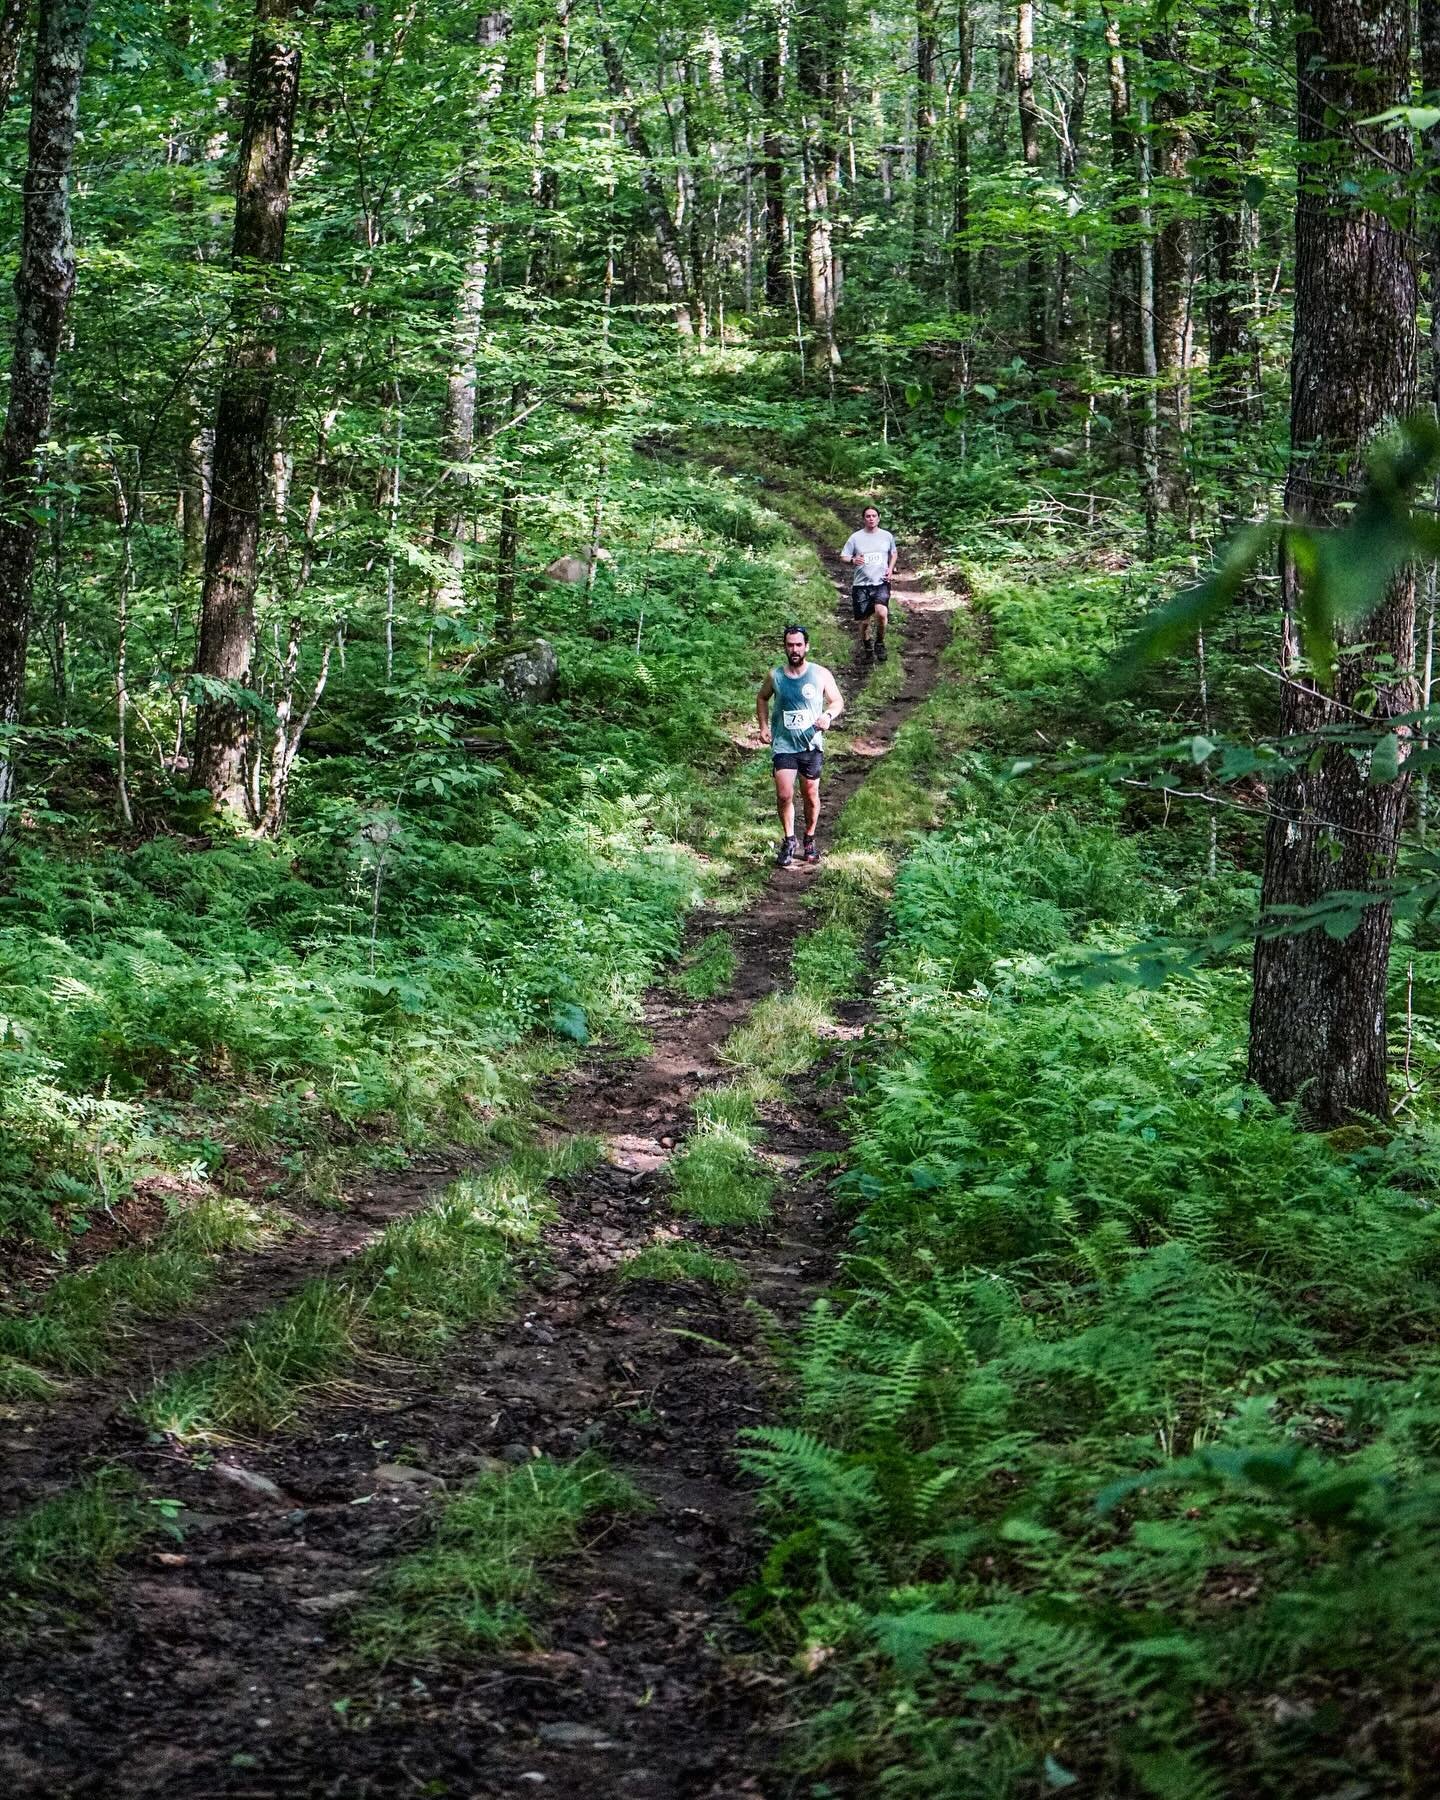 The Goshen Gallop is right around the corner! July 13th, our 46th year! Sign ups are open&hellip;we&rsquo;re hoping for a less stormy summer and some dry trails this year 😁 Time to start training&hellip;maybe this is the year the men&rsquo;s course 